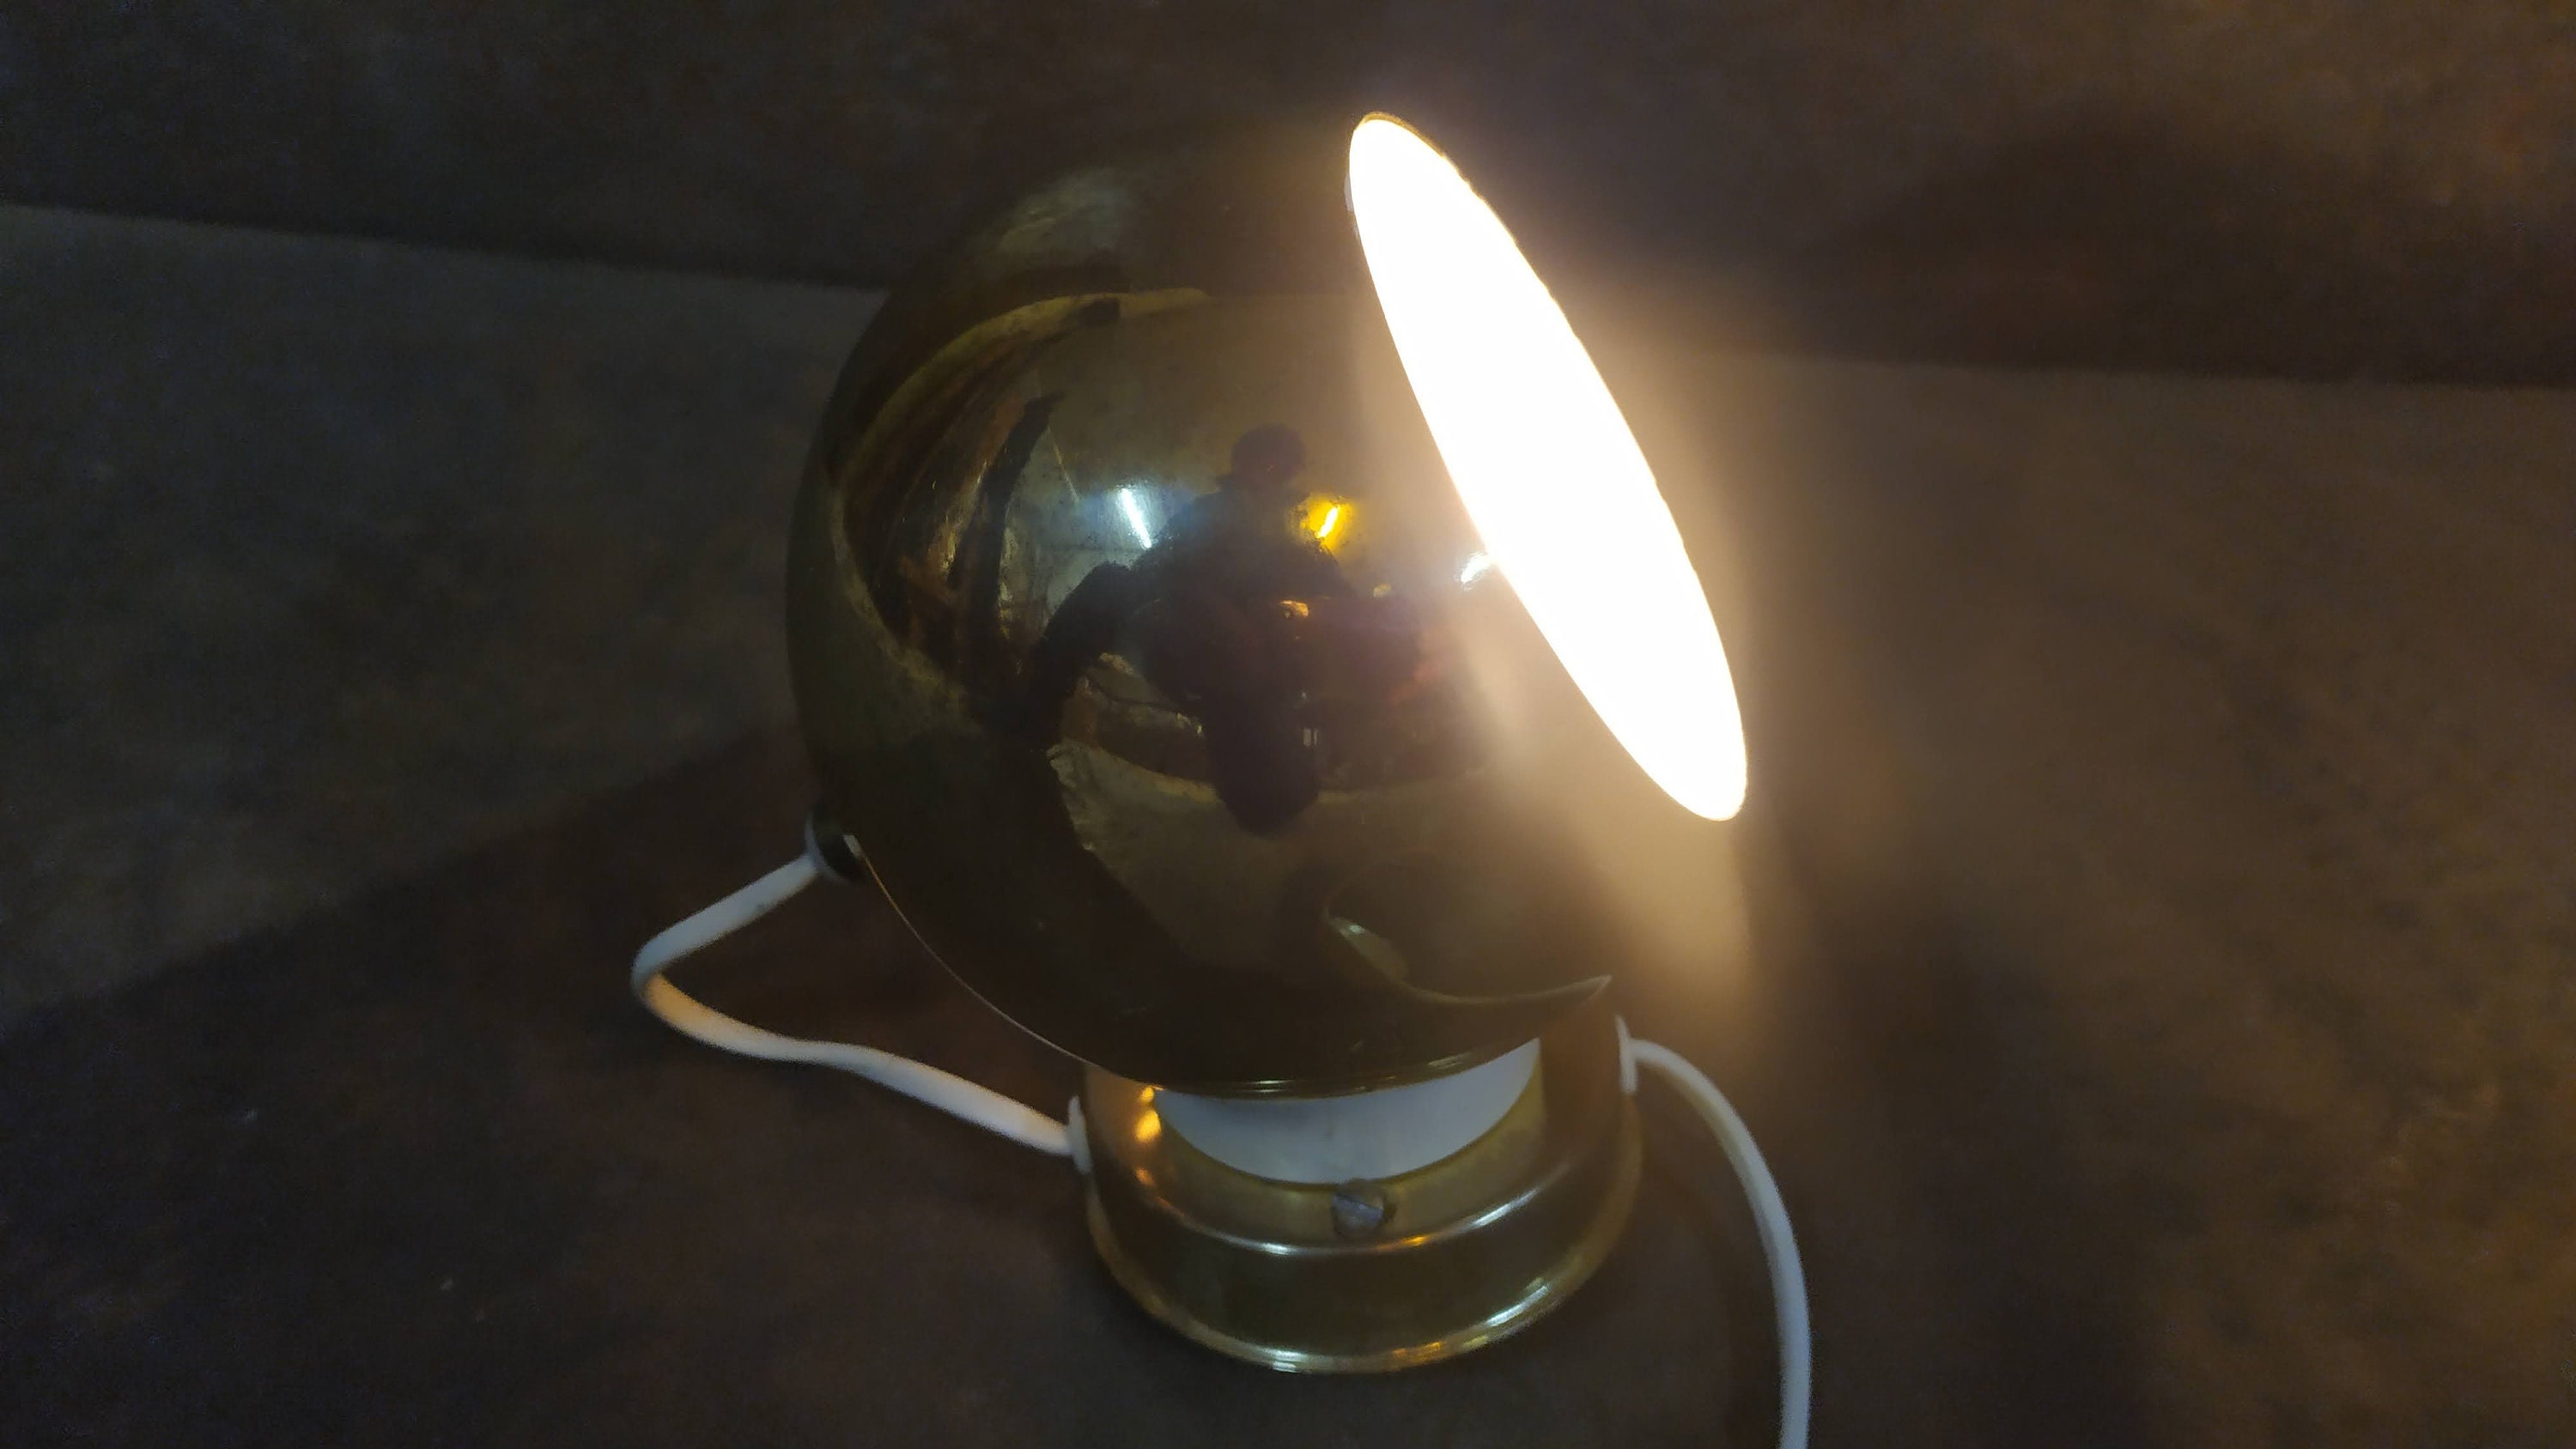 The Magnetic Lamp – SHOPLICHT